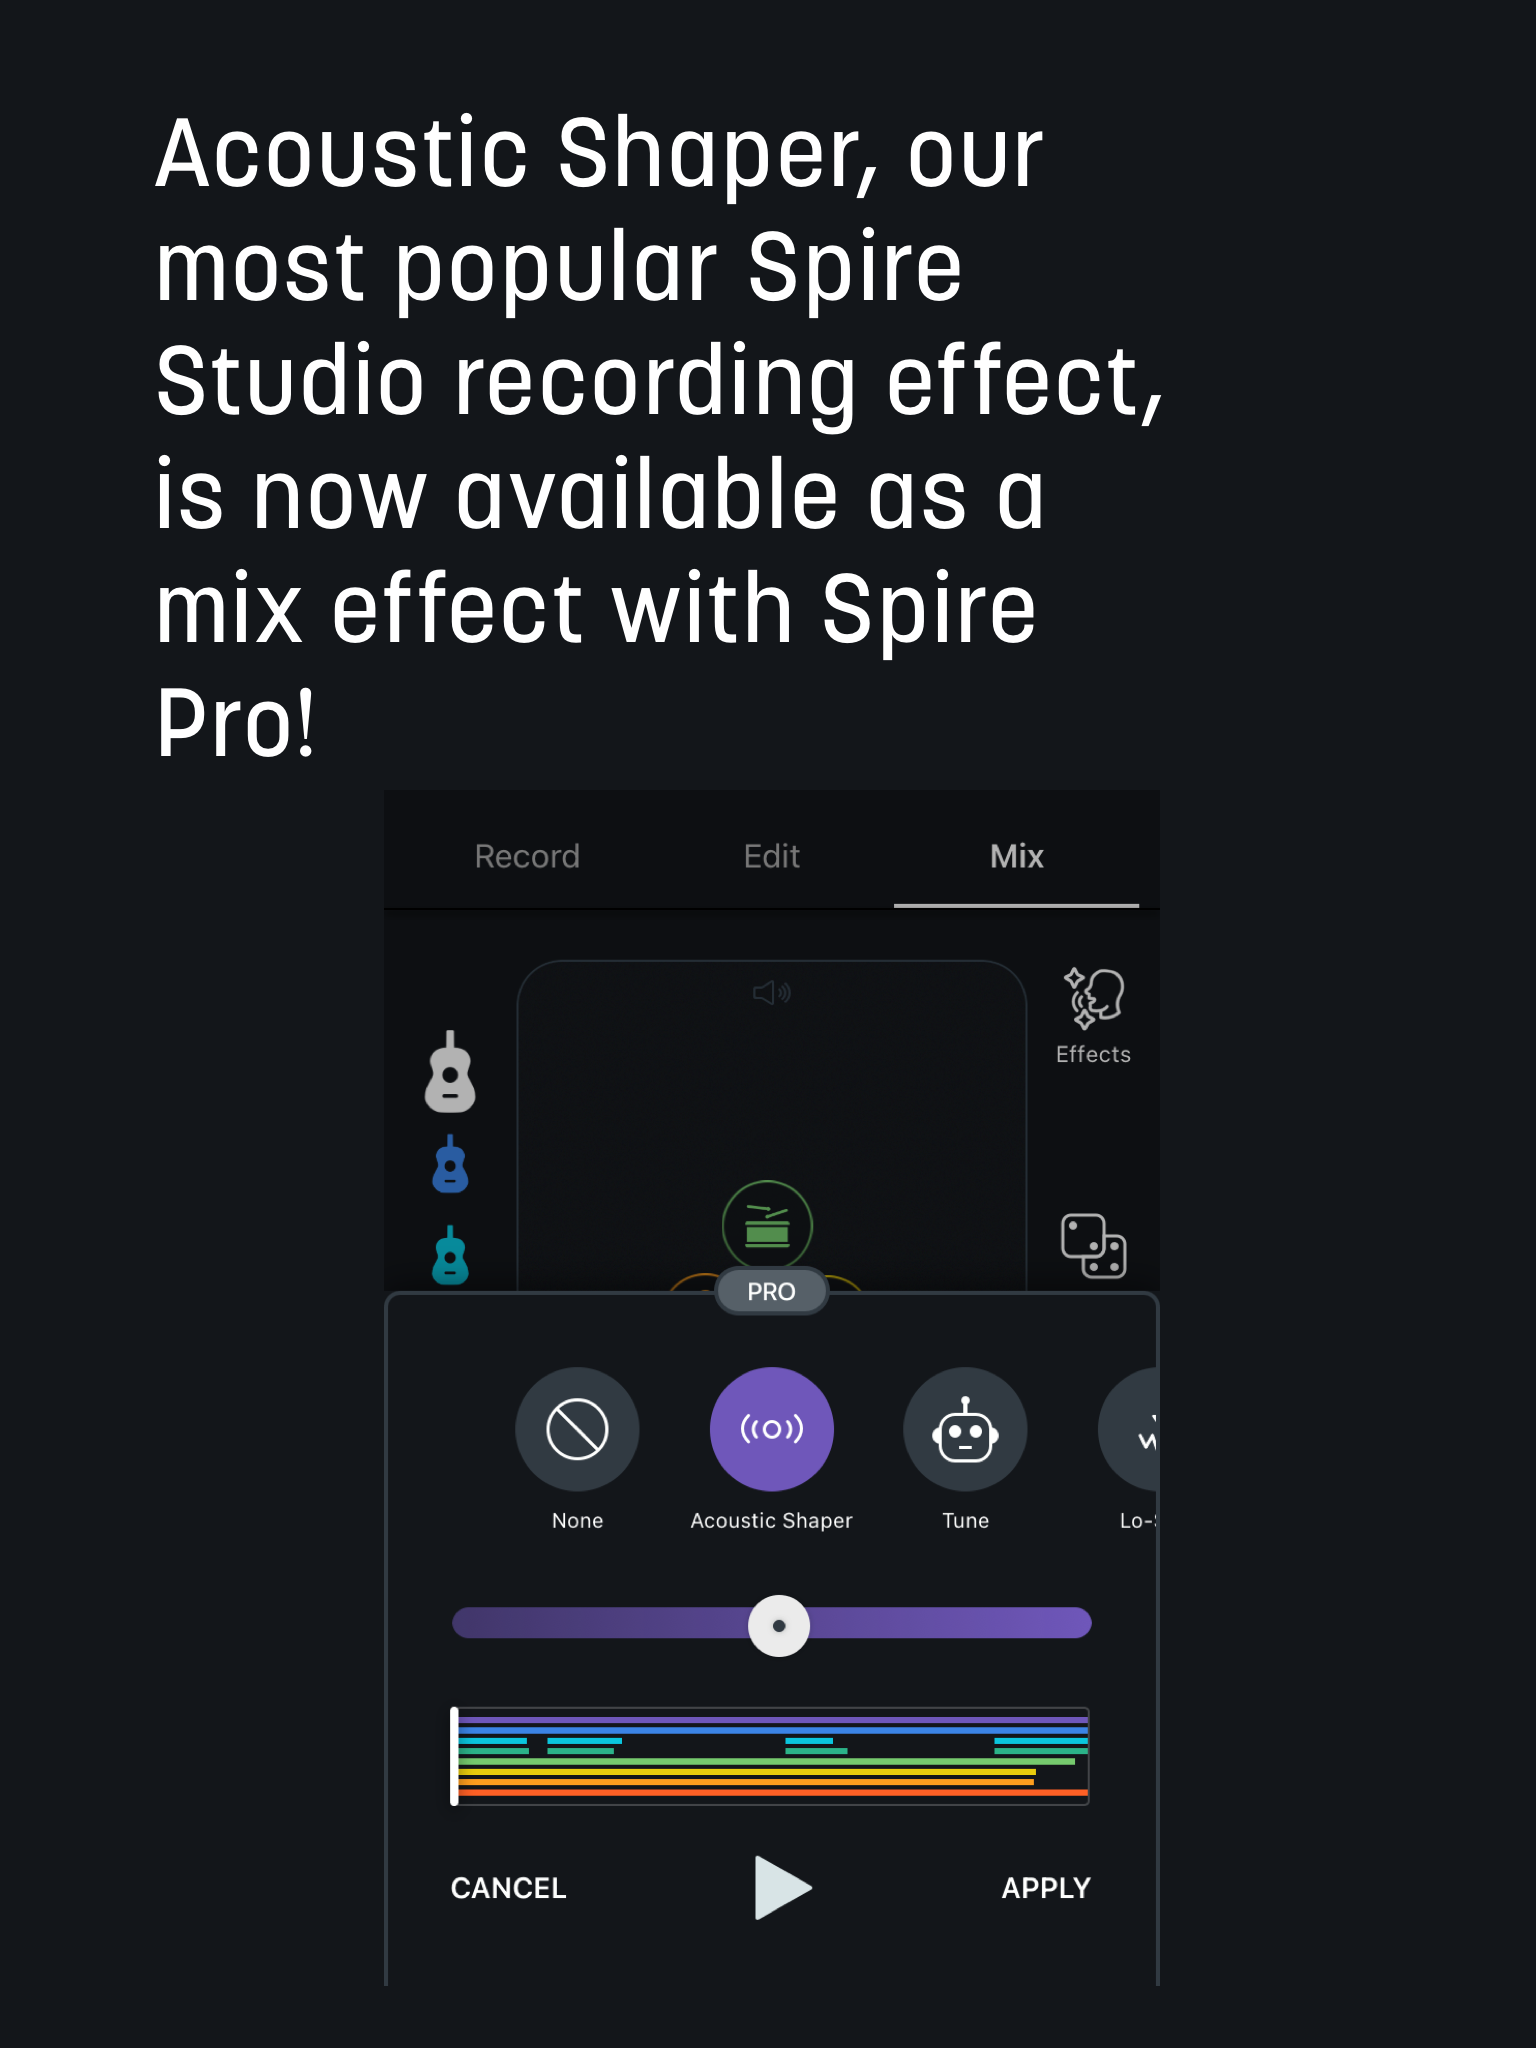 What's new in Spire? – iZotope Product Support Help and Knowledge Base